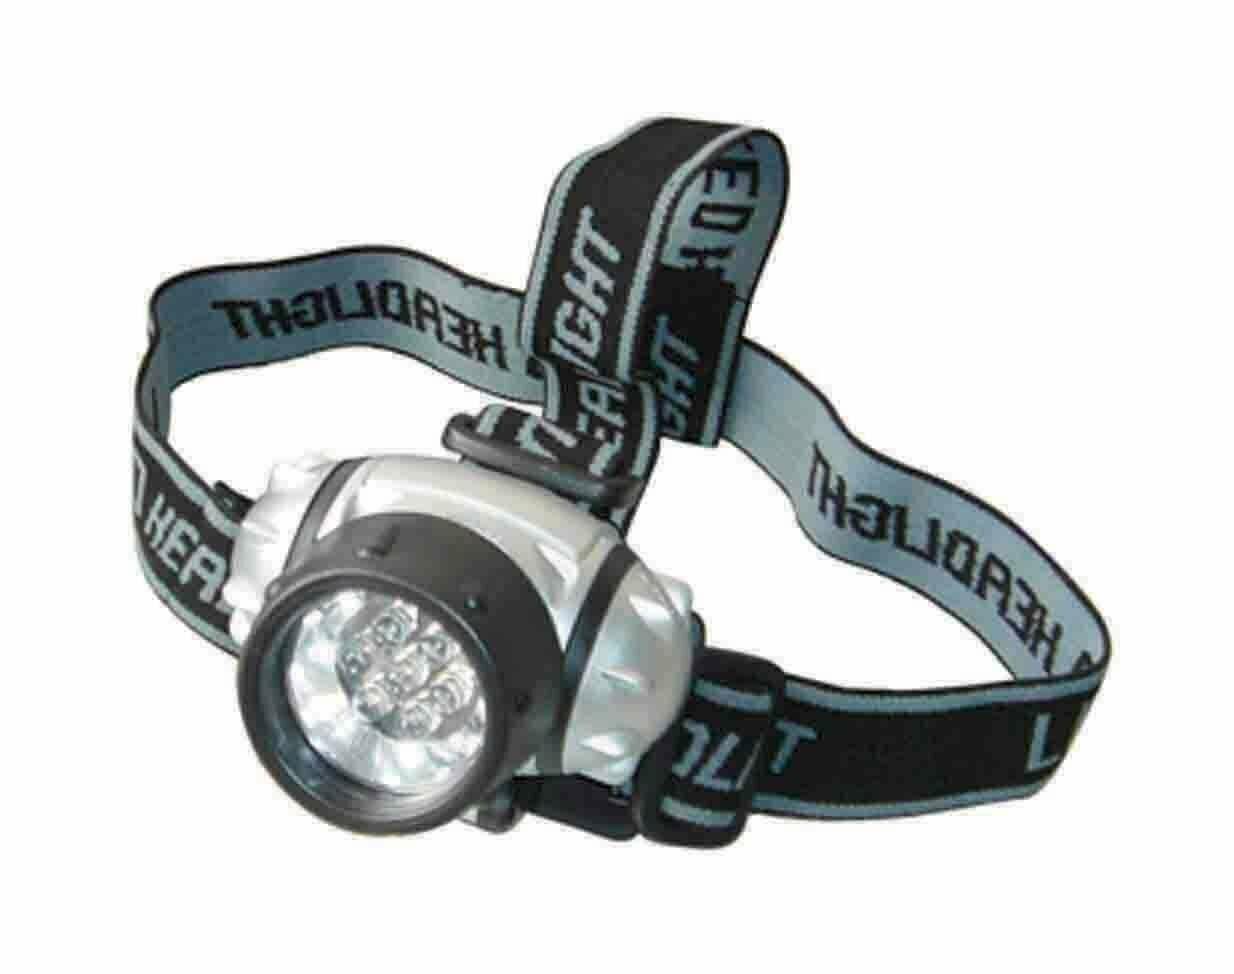 LED HEAD LAMP AND CAP LIGHT - The Low Vision Store